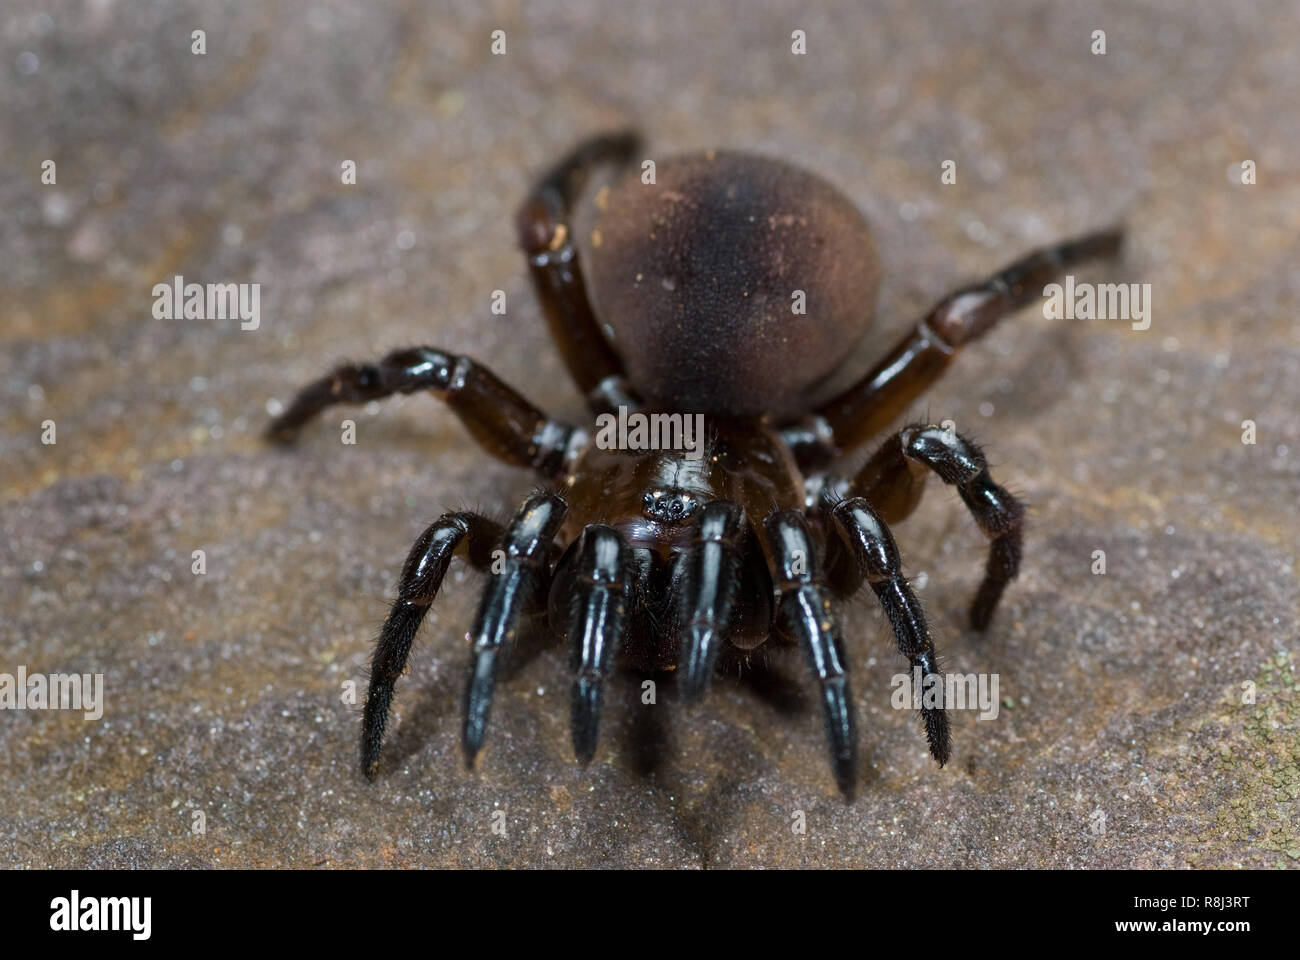 Purse web spider (Atypus affinis) in defensive pose. What appear to be a fifth pair of legs in the front are a pair of pedipalps. This primitive spide Stock Photo